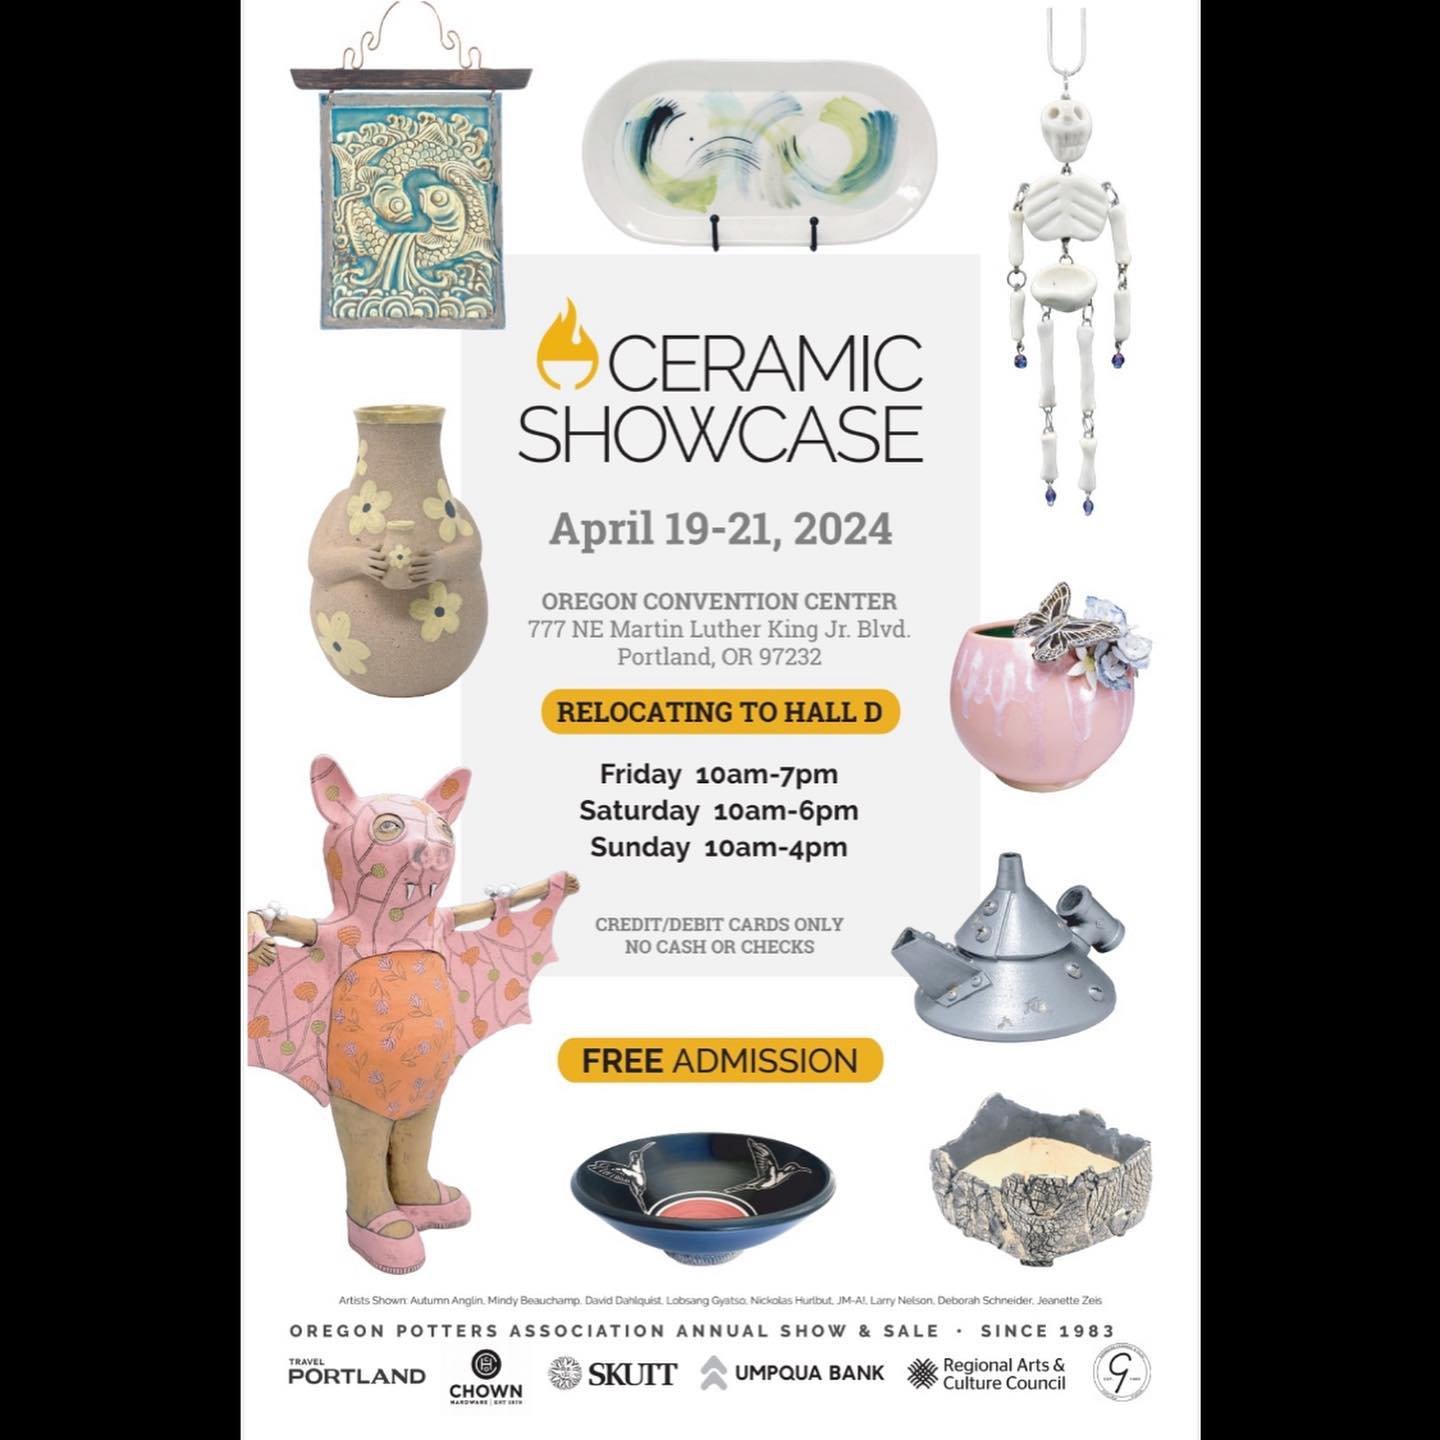 Come check us out at Ceramic Showcase this weekend! I have a ton of new pieces to share with you! 
&bull;
@oregonpotters @ceramicshowcase